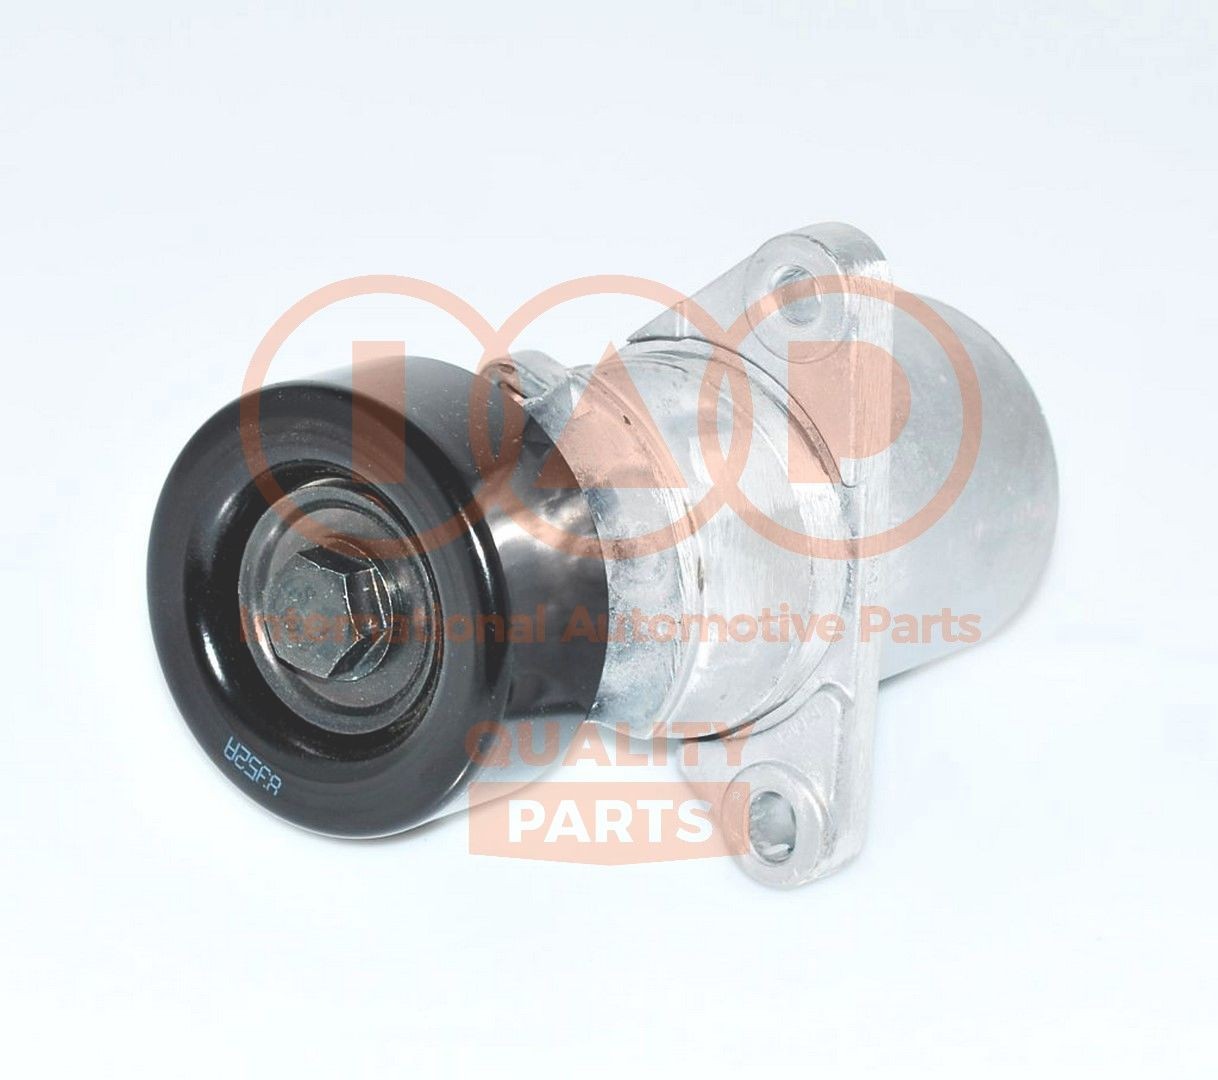 IAP QUALITY PARTS 127-07175 Deflection / Guide Pulley, v-ribbed belt